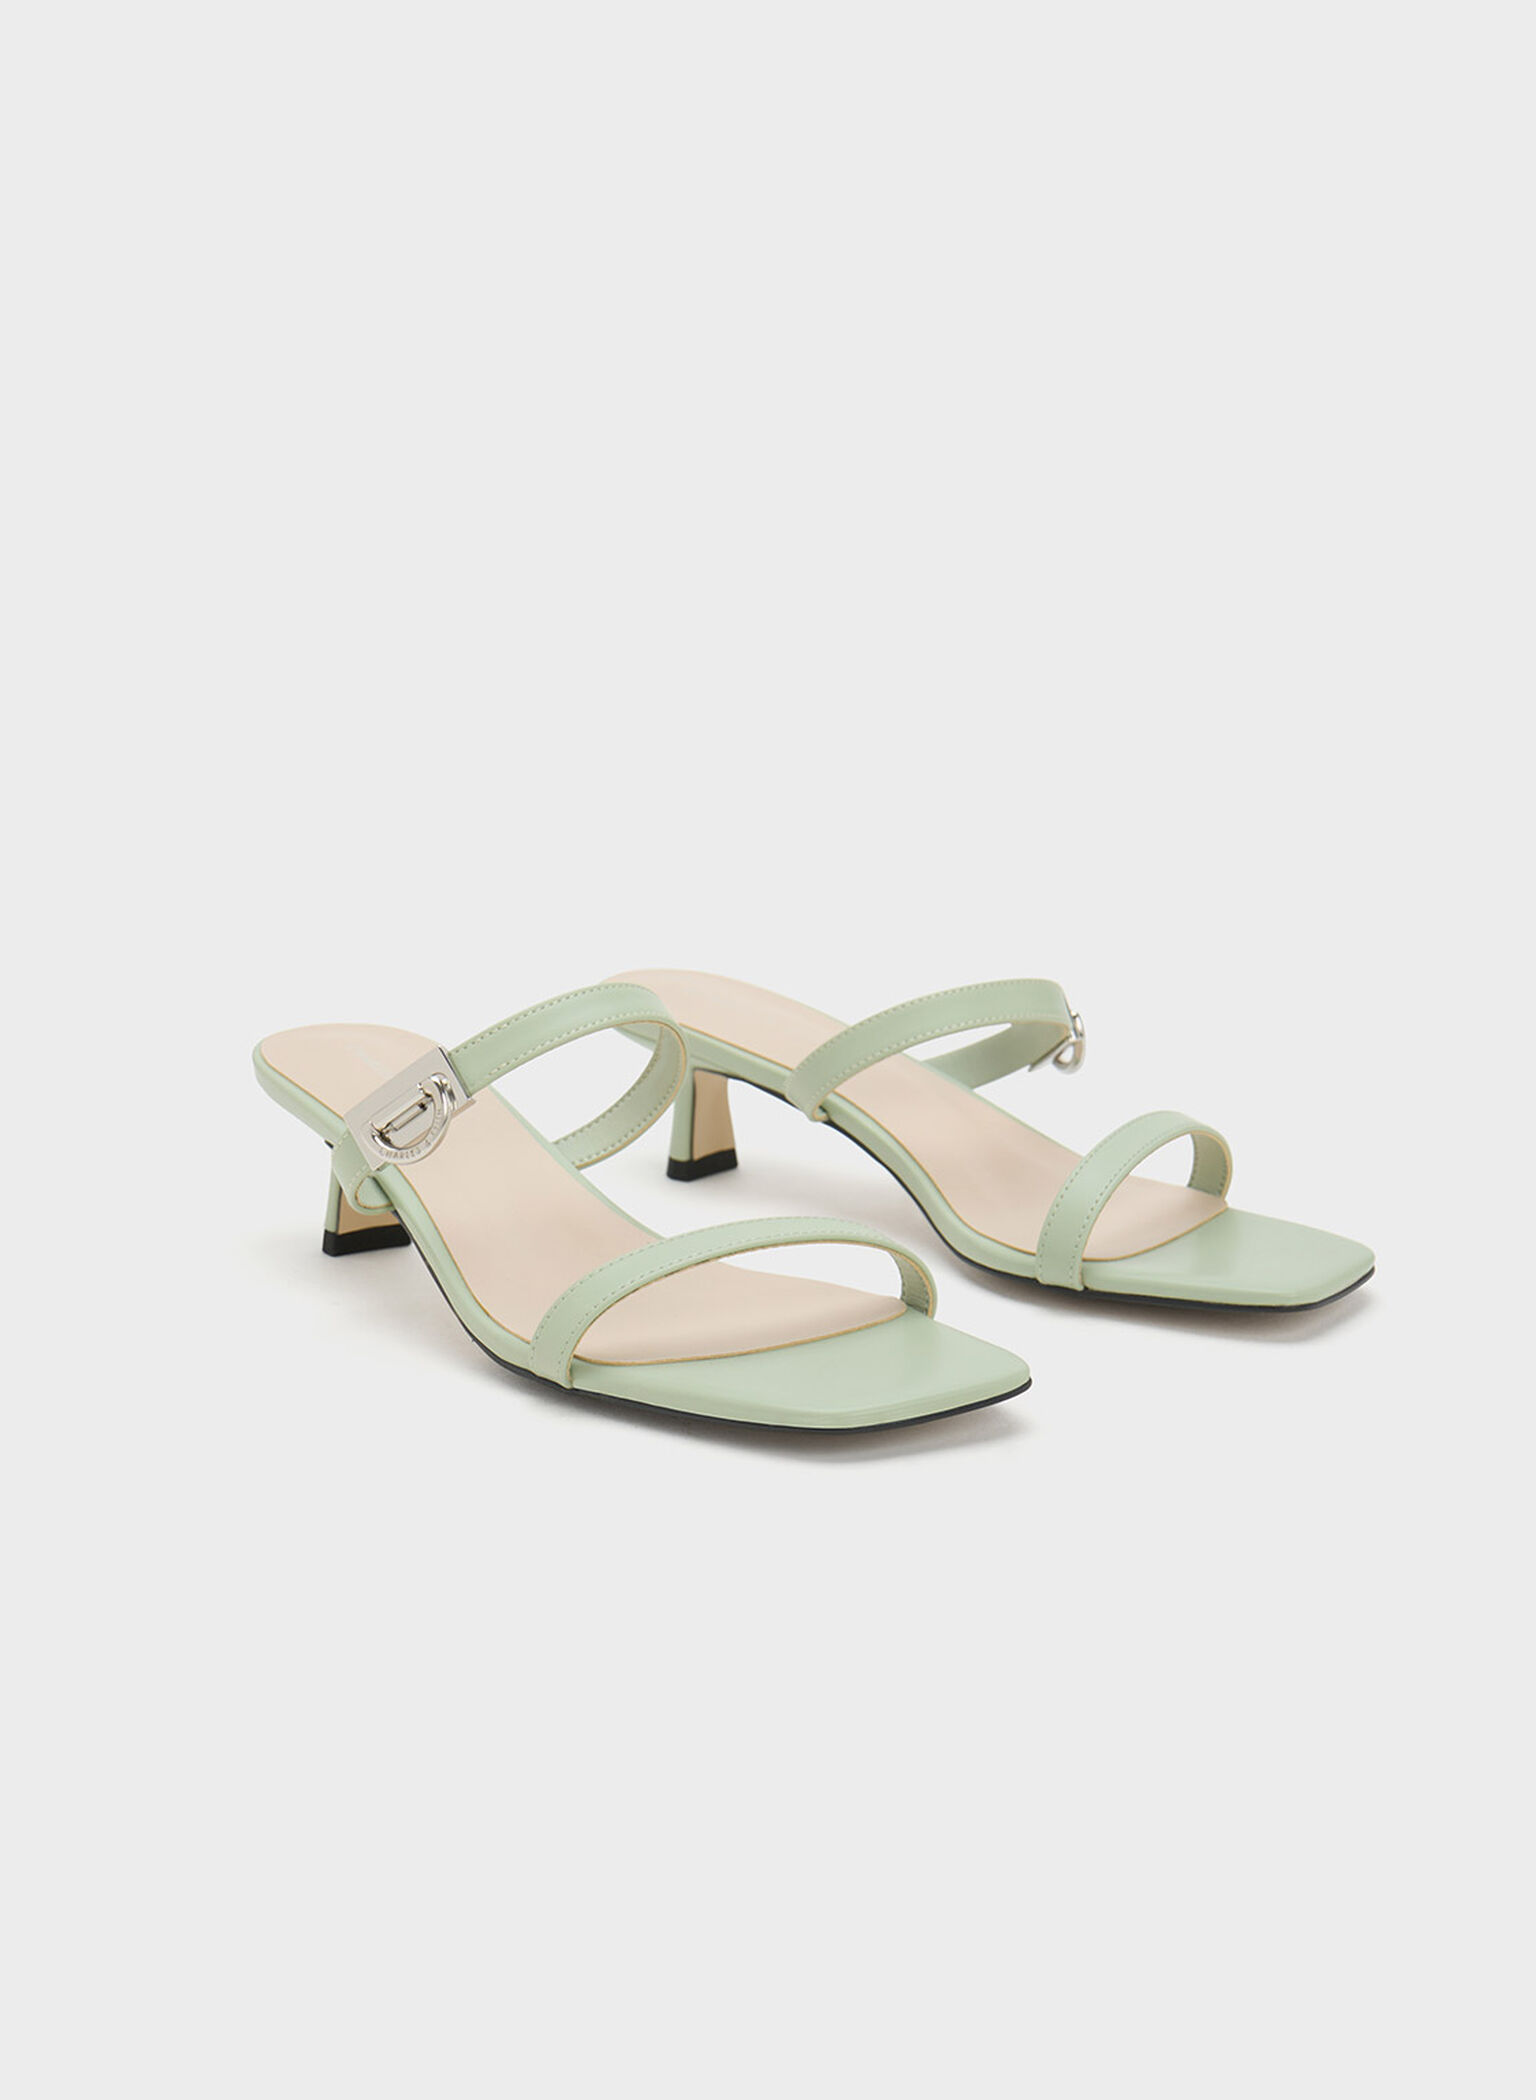 Metallic Accent Double Strap Mules, Sage Green, hi-res